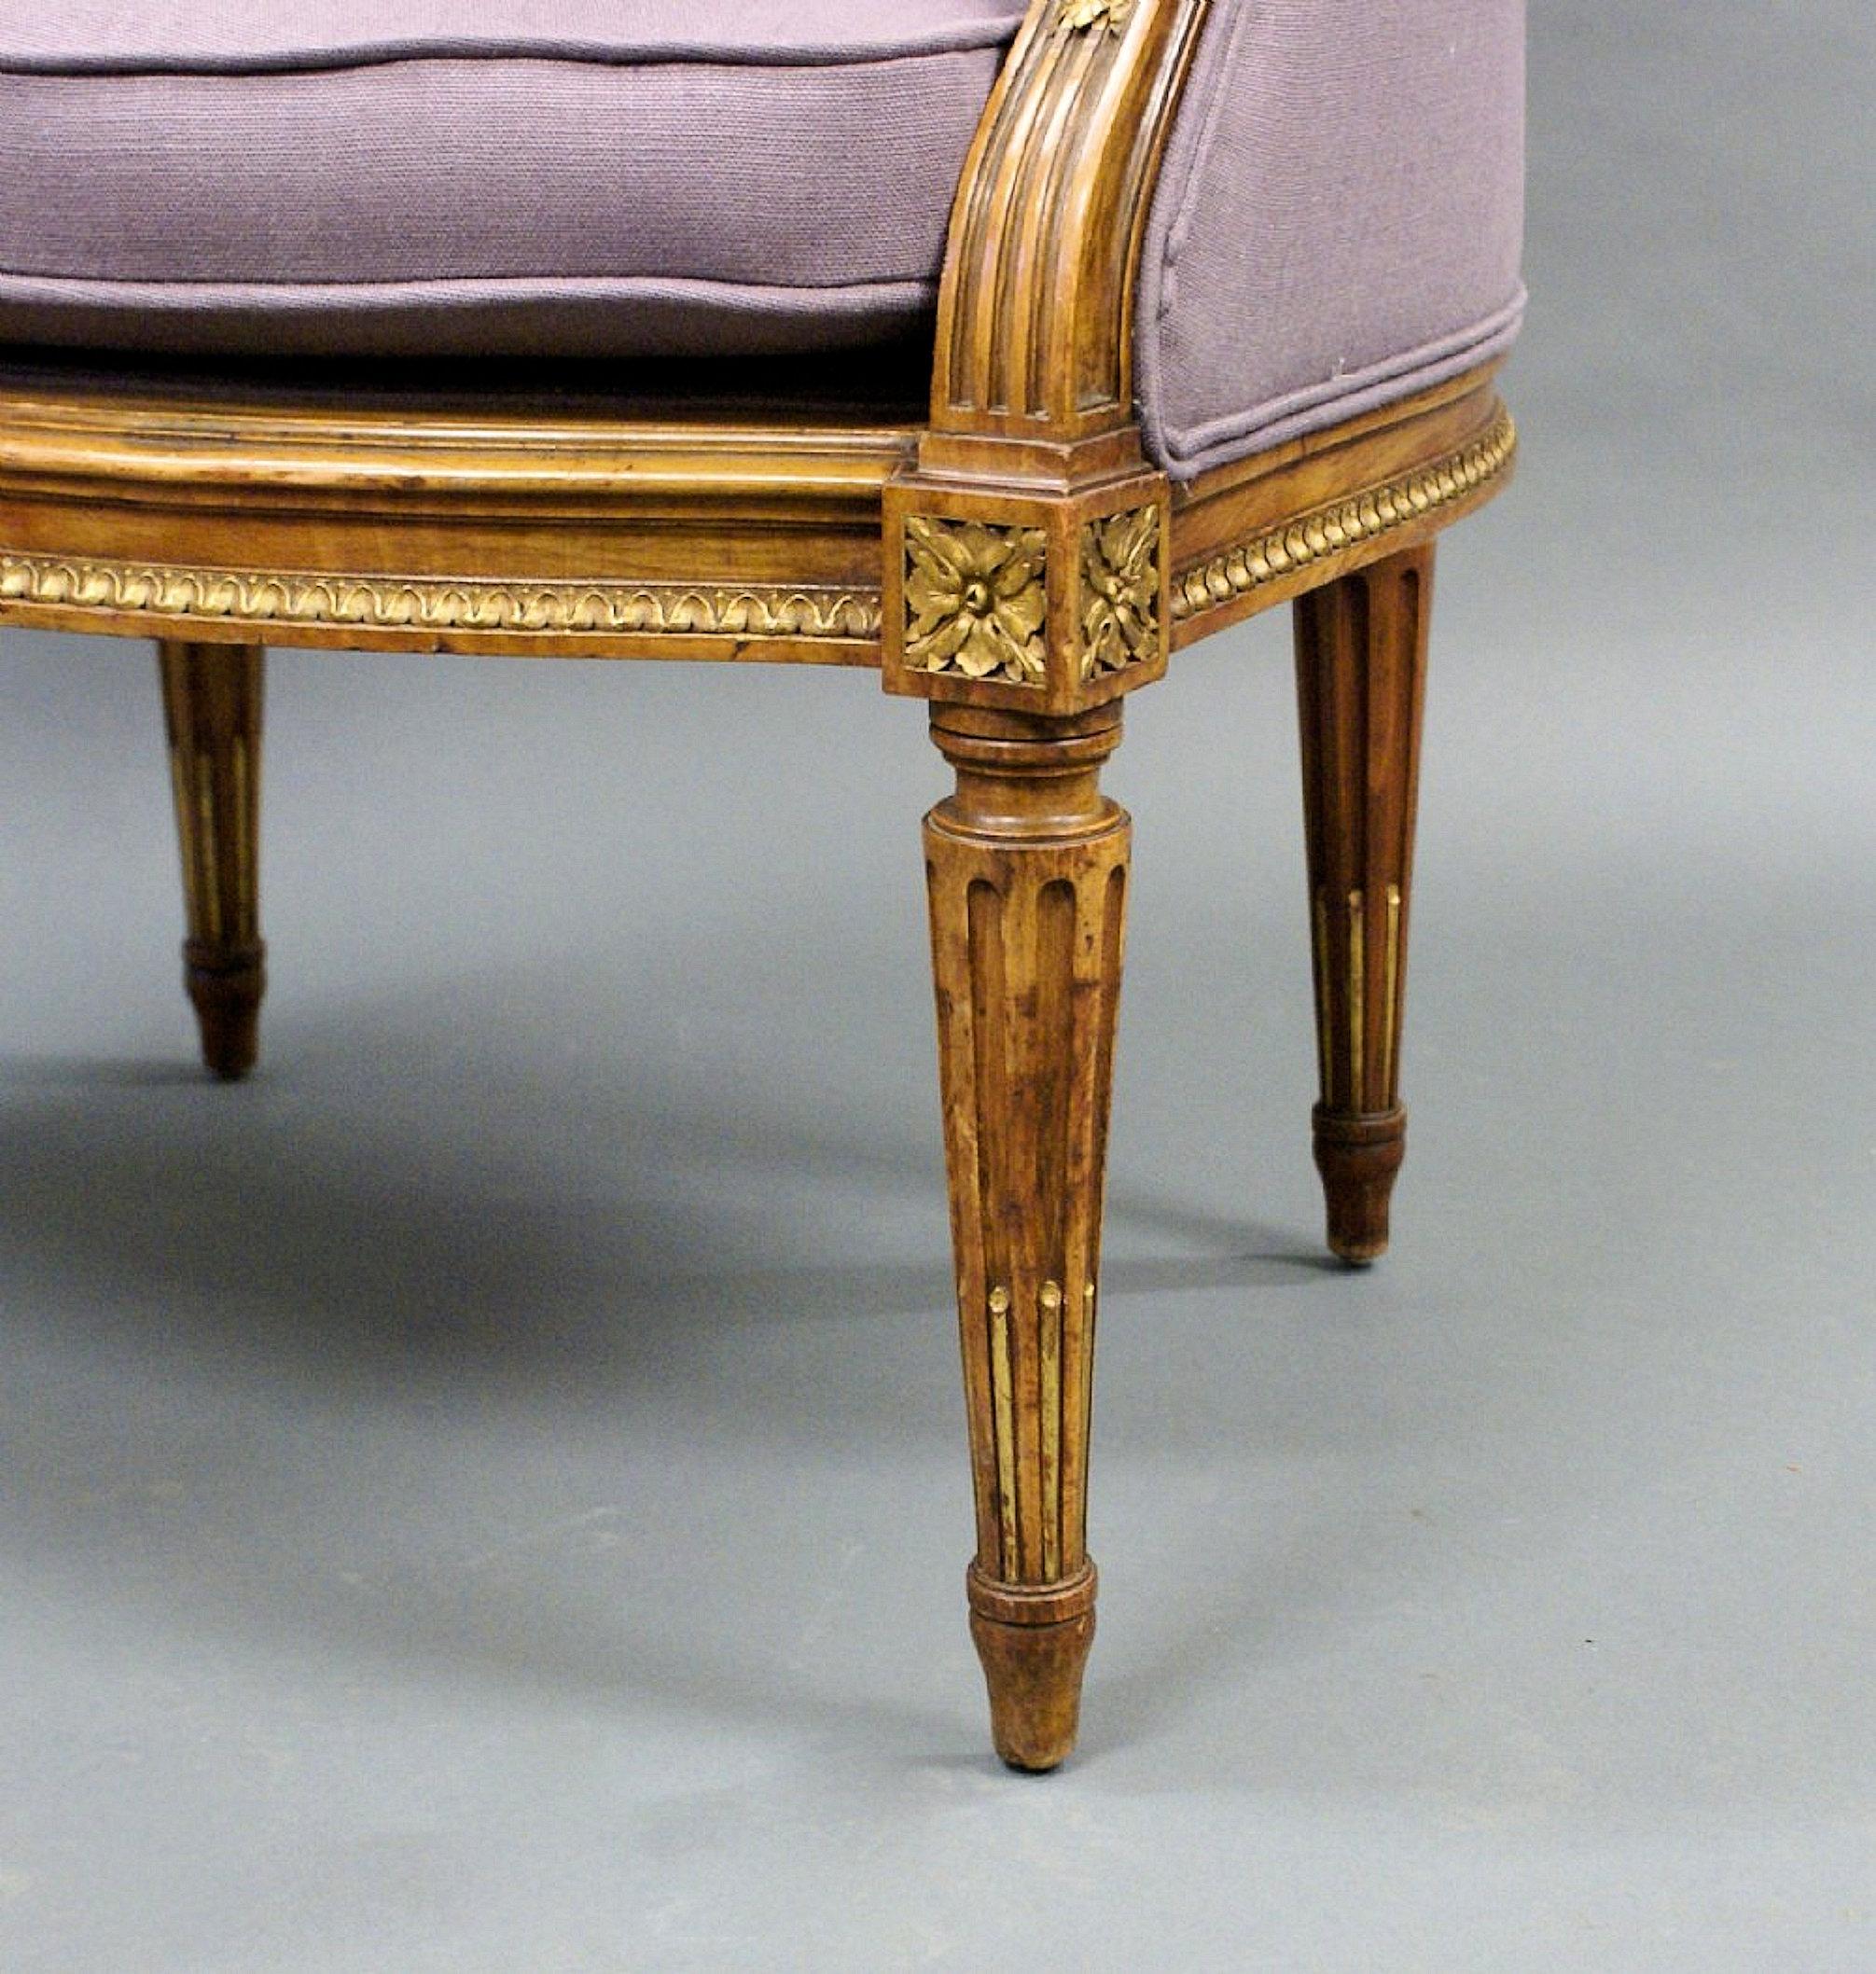 This gorgeous and very comfortable 19th C. French armchair is supported on turned and fluted legs, with a carved moulding around the outer frame. The chair has recently been reupholstered in a soft pale lilac linen blend fabric, but retains the